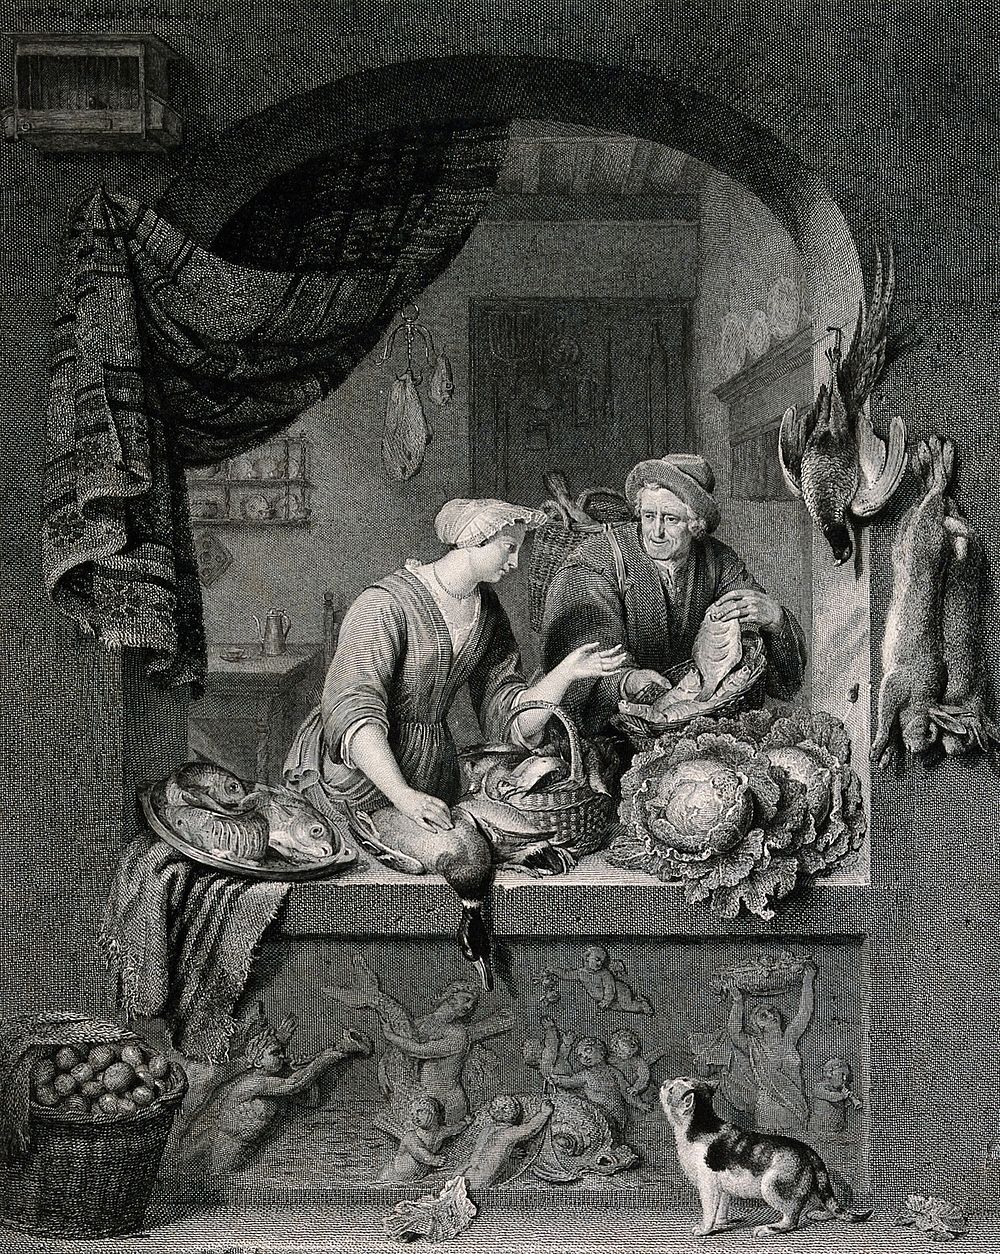 A man comes to a shop to sell a fish to a woman who sells poultry, fish and vegetables, watched by a cat. Engraving by J.…